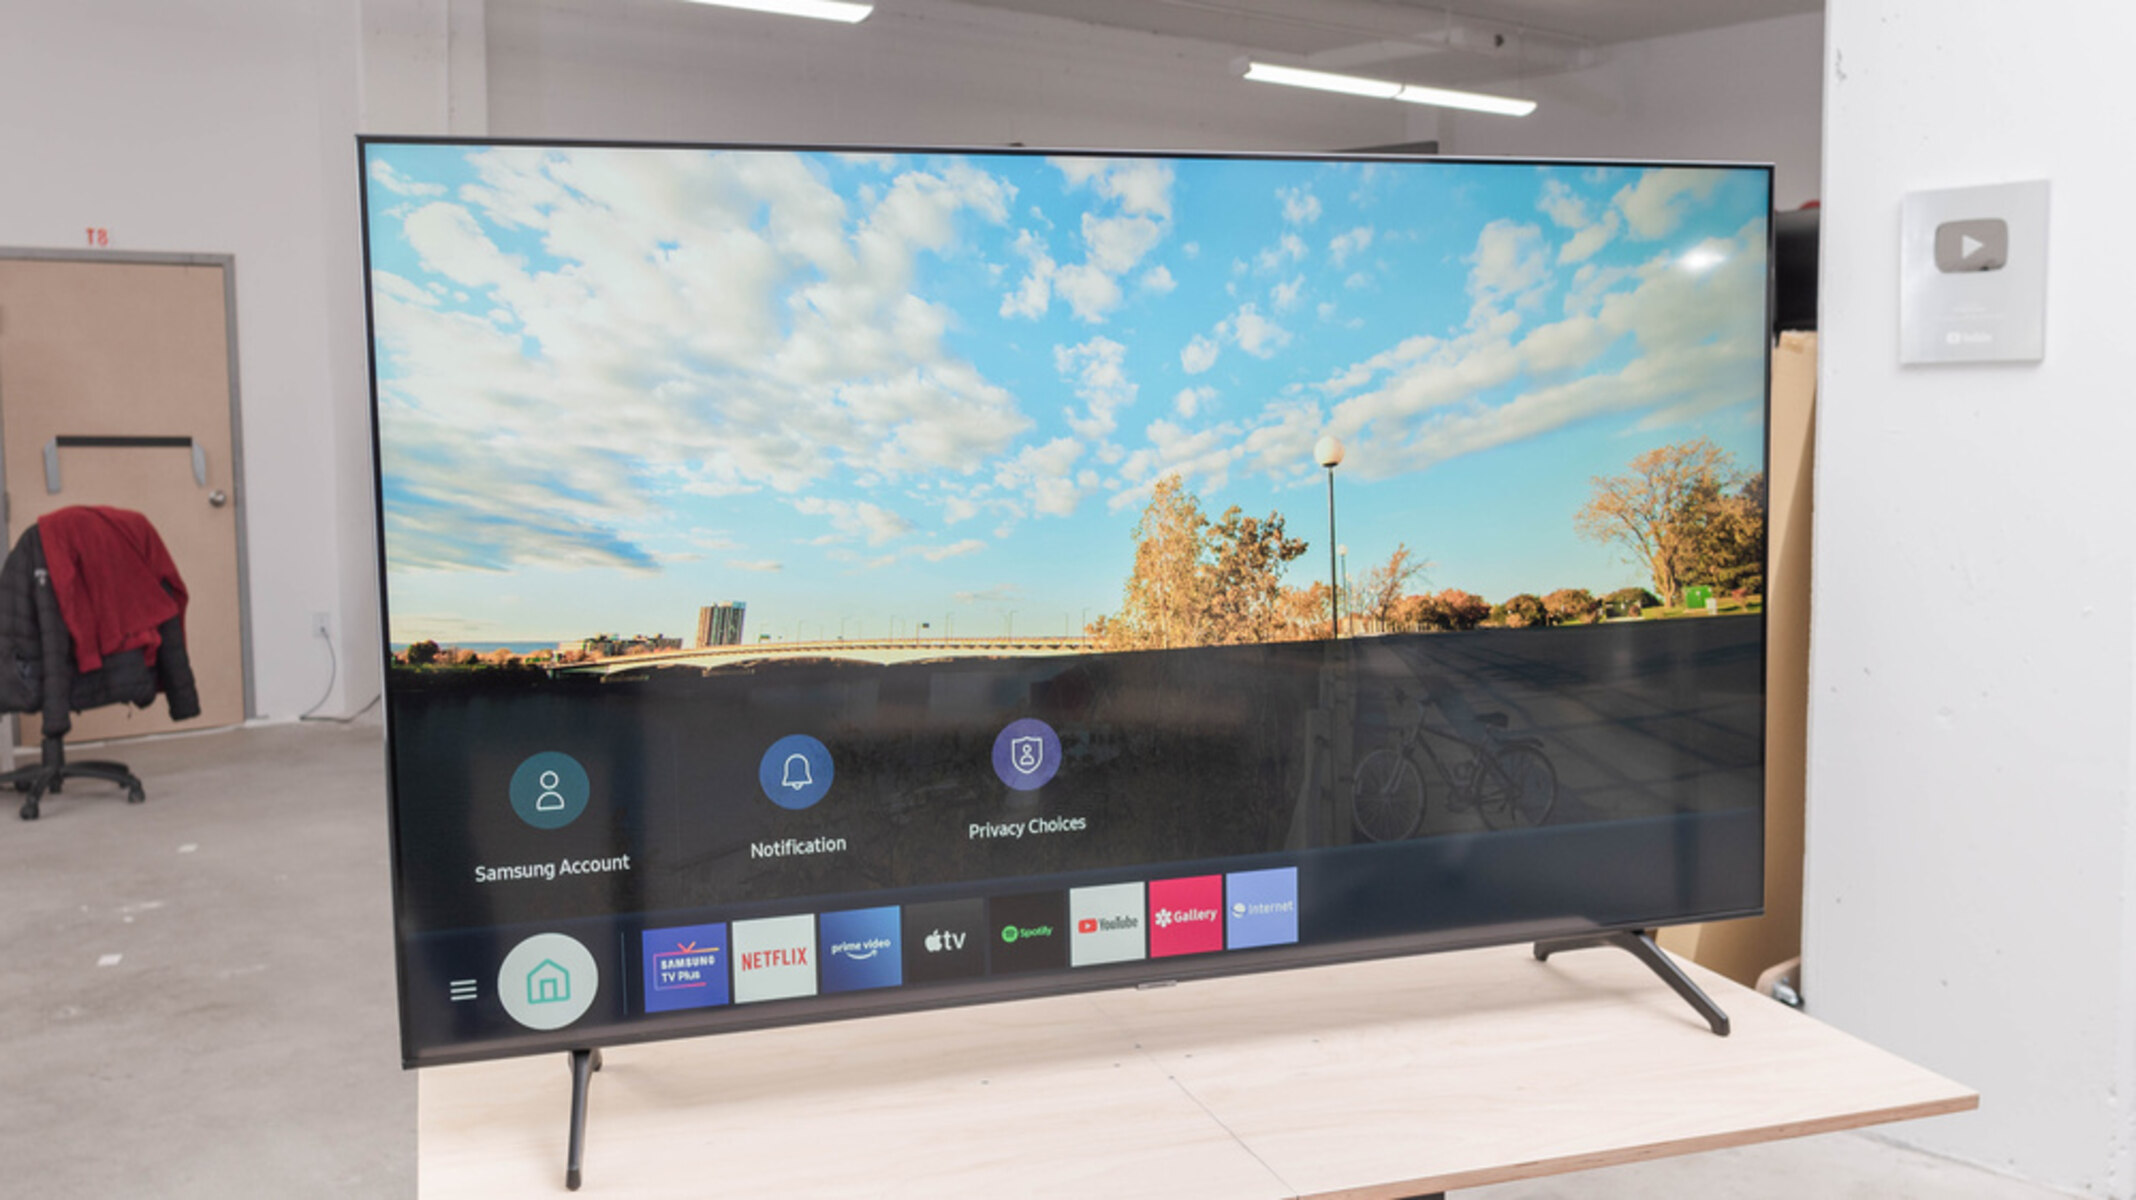 How Wide Are The Legs On A 70-Inch QLED TV